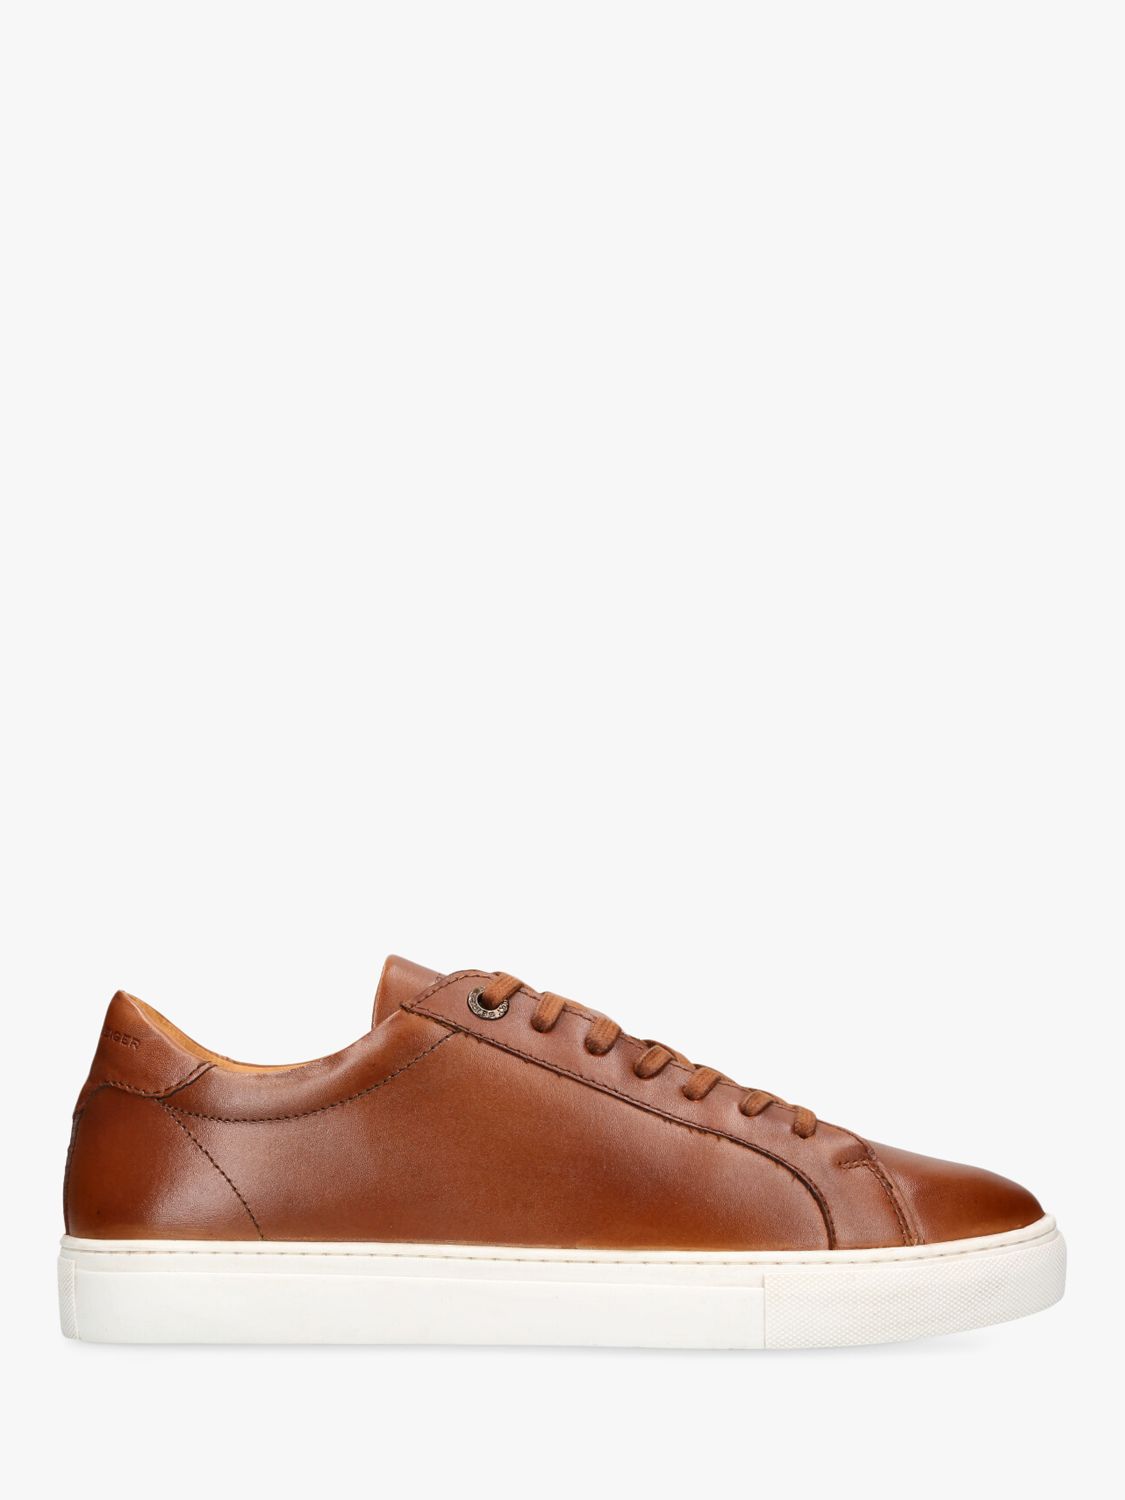 KG Kurt Geiger Fire Leather Trainers, Brown Tan at John Lewis & Partners